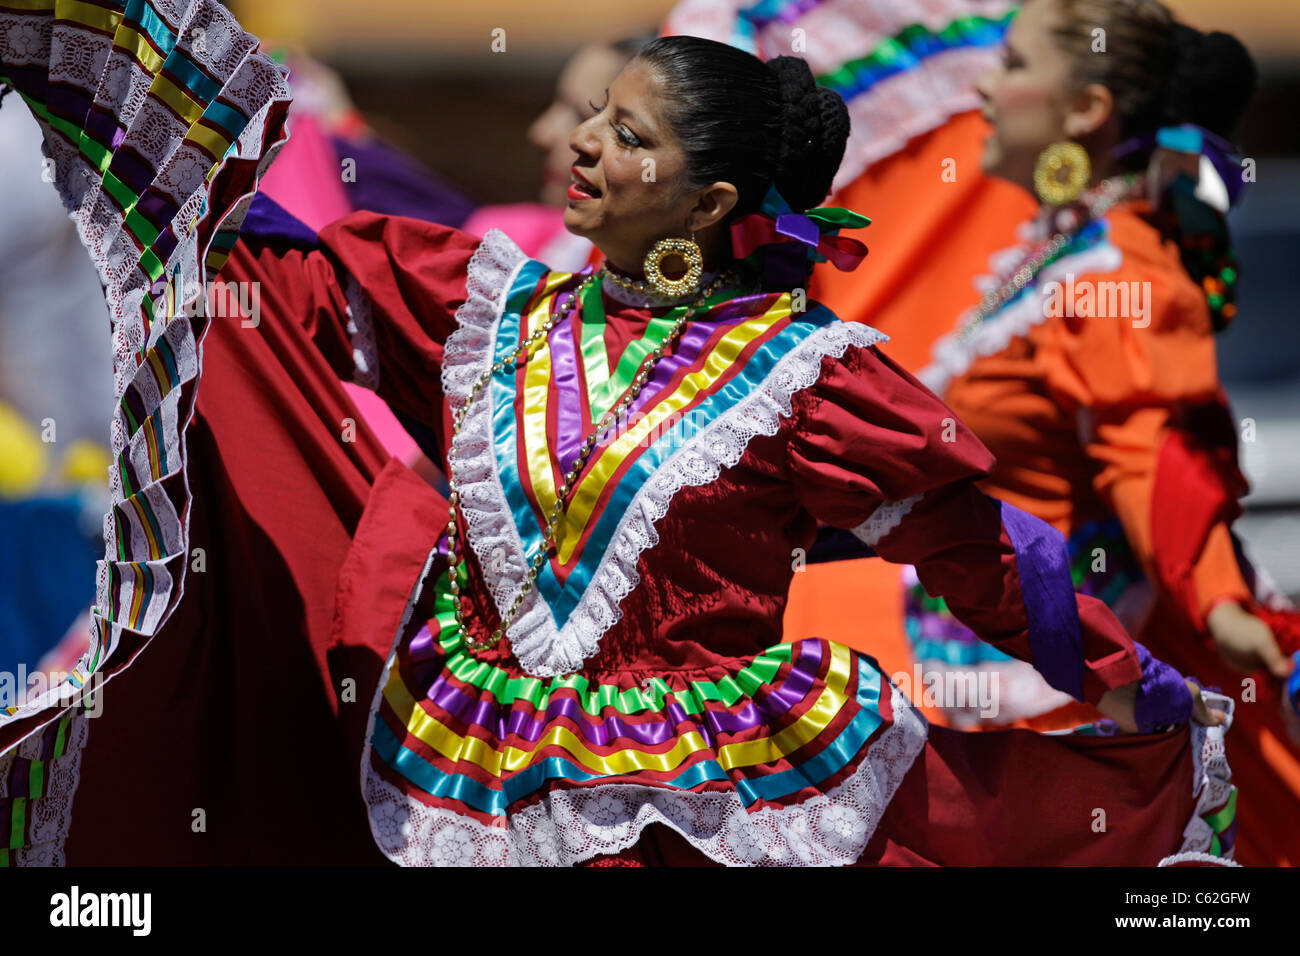 Colorful Mexican dancers perform Stock Photo